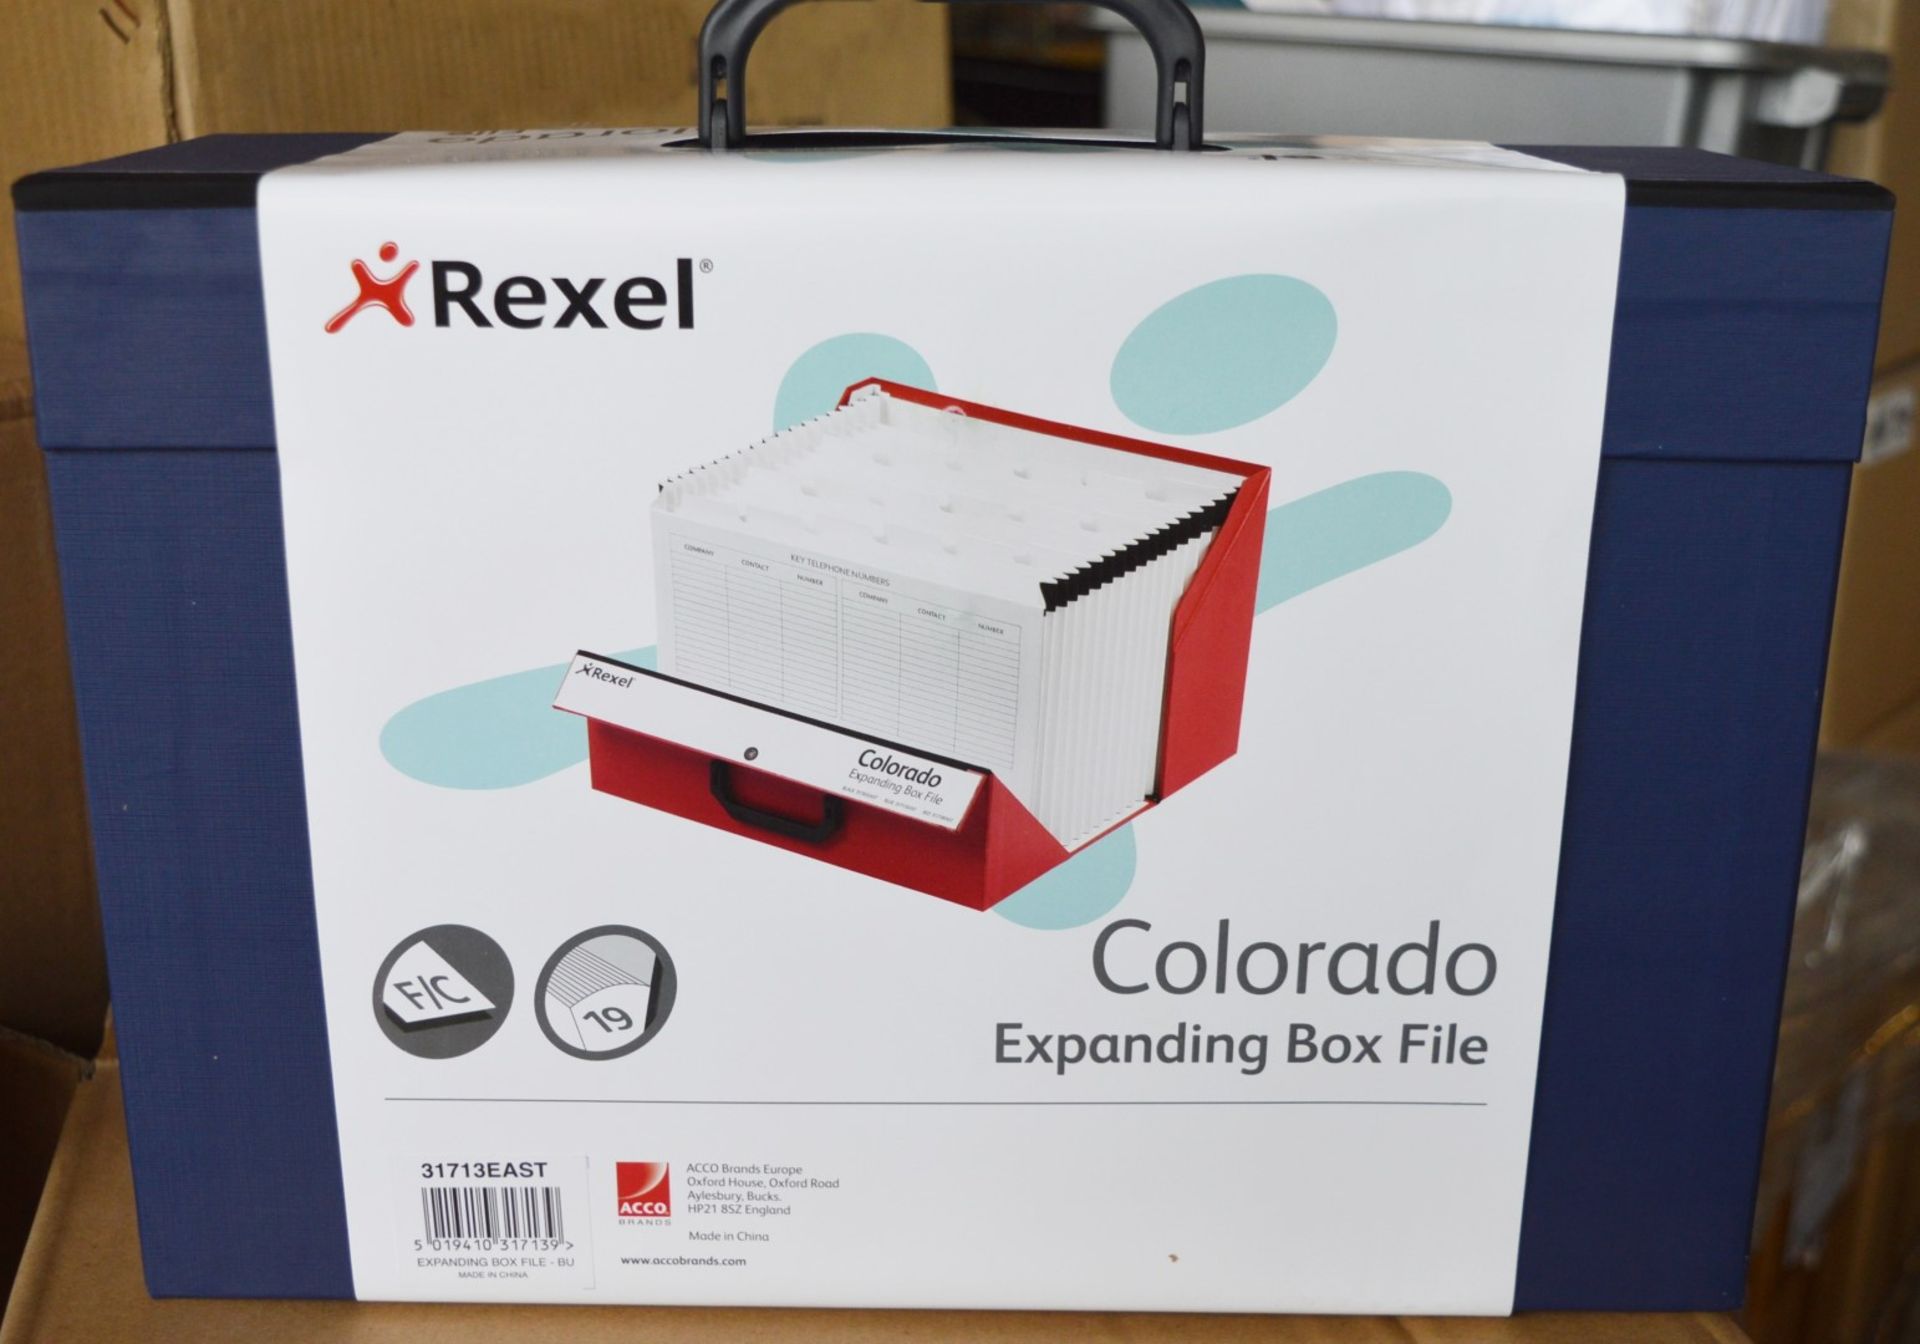 4 x Rexel Colorado Expanding Document Box Files - Blue Colour - Product Code 31713EAST - Brand New